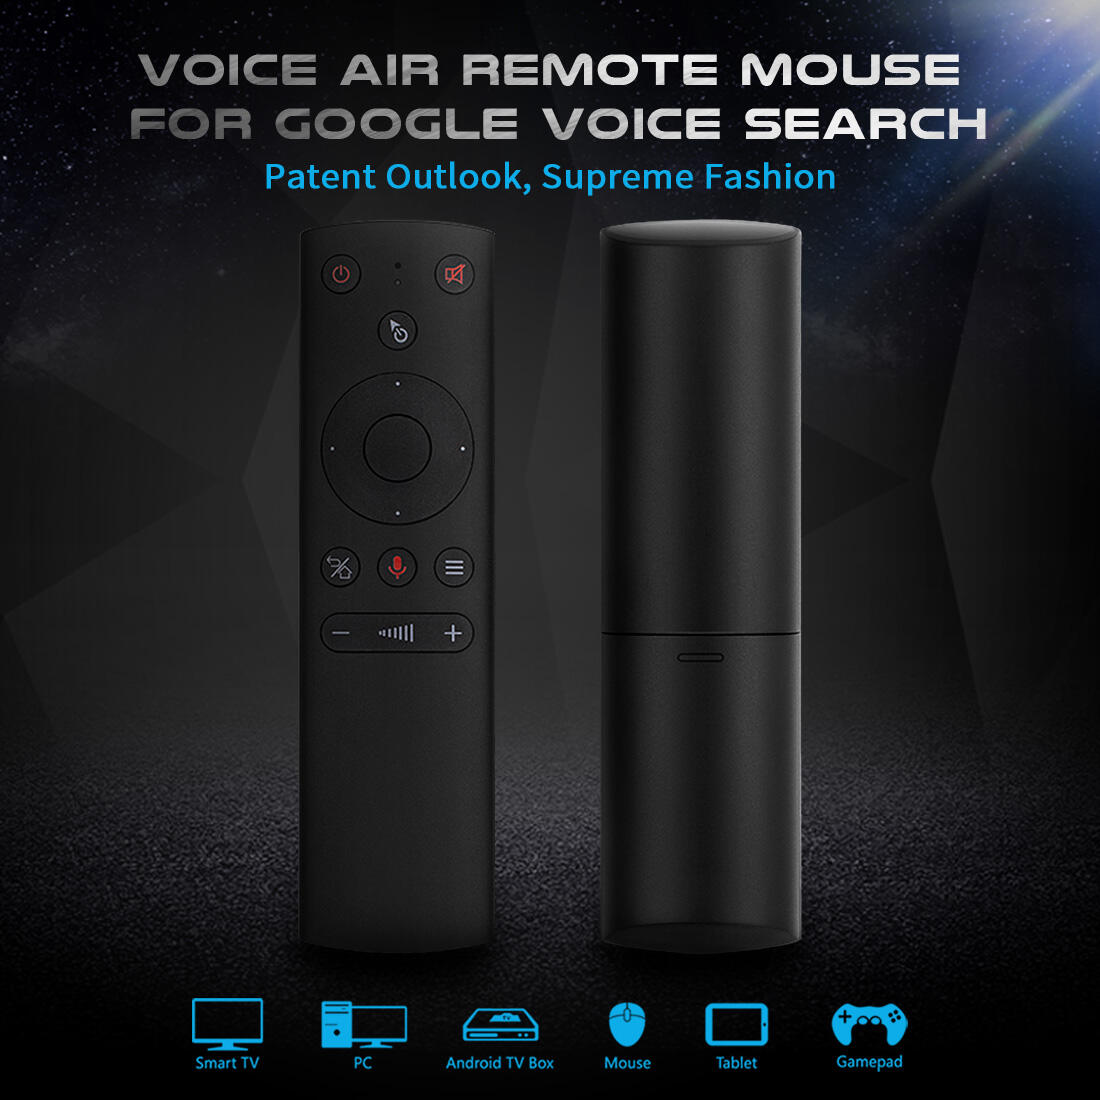 New Design G21 Air Mouse Built-in High Fidelity Voice Microphone with three level adjustable mouse speed Remote control details